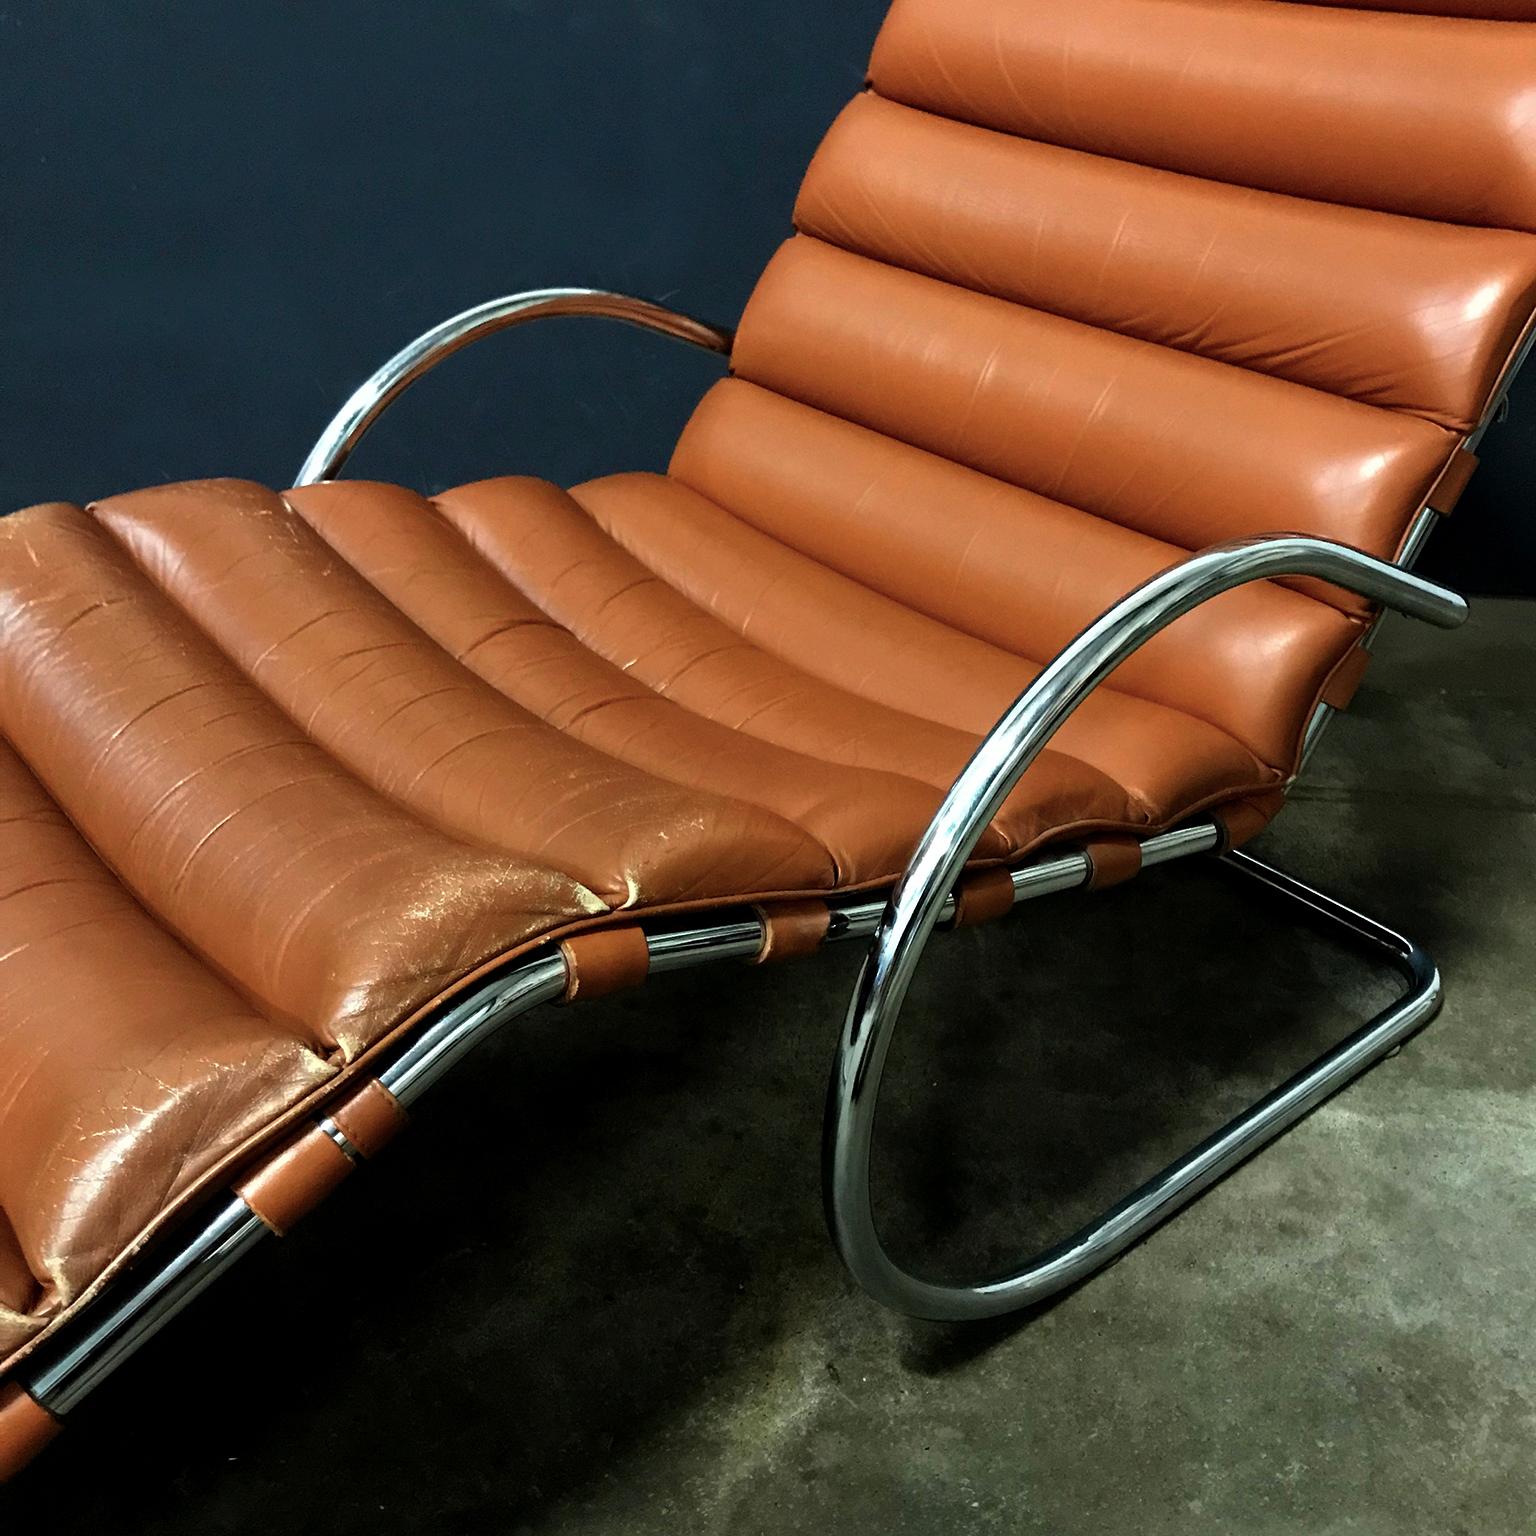 1965, Ludwig Mies van der Rohe, Rare Early Production Adjustable Chaise Longue 1